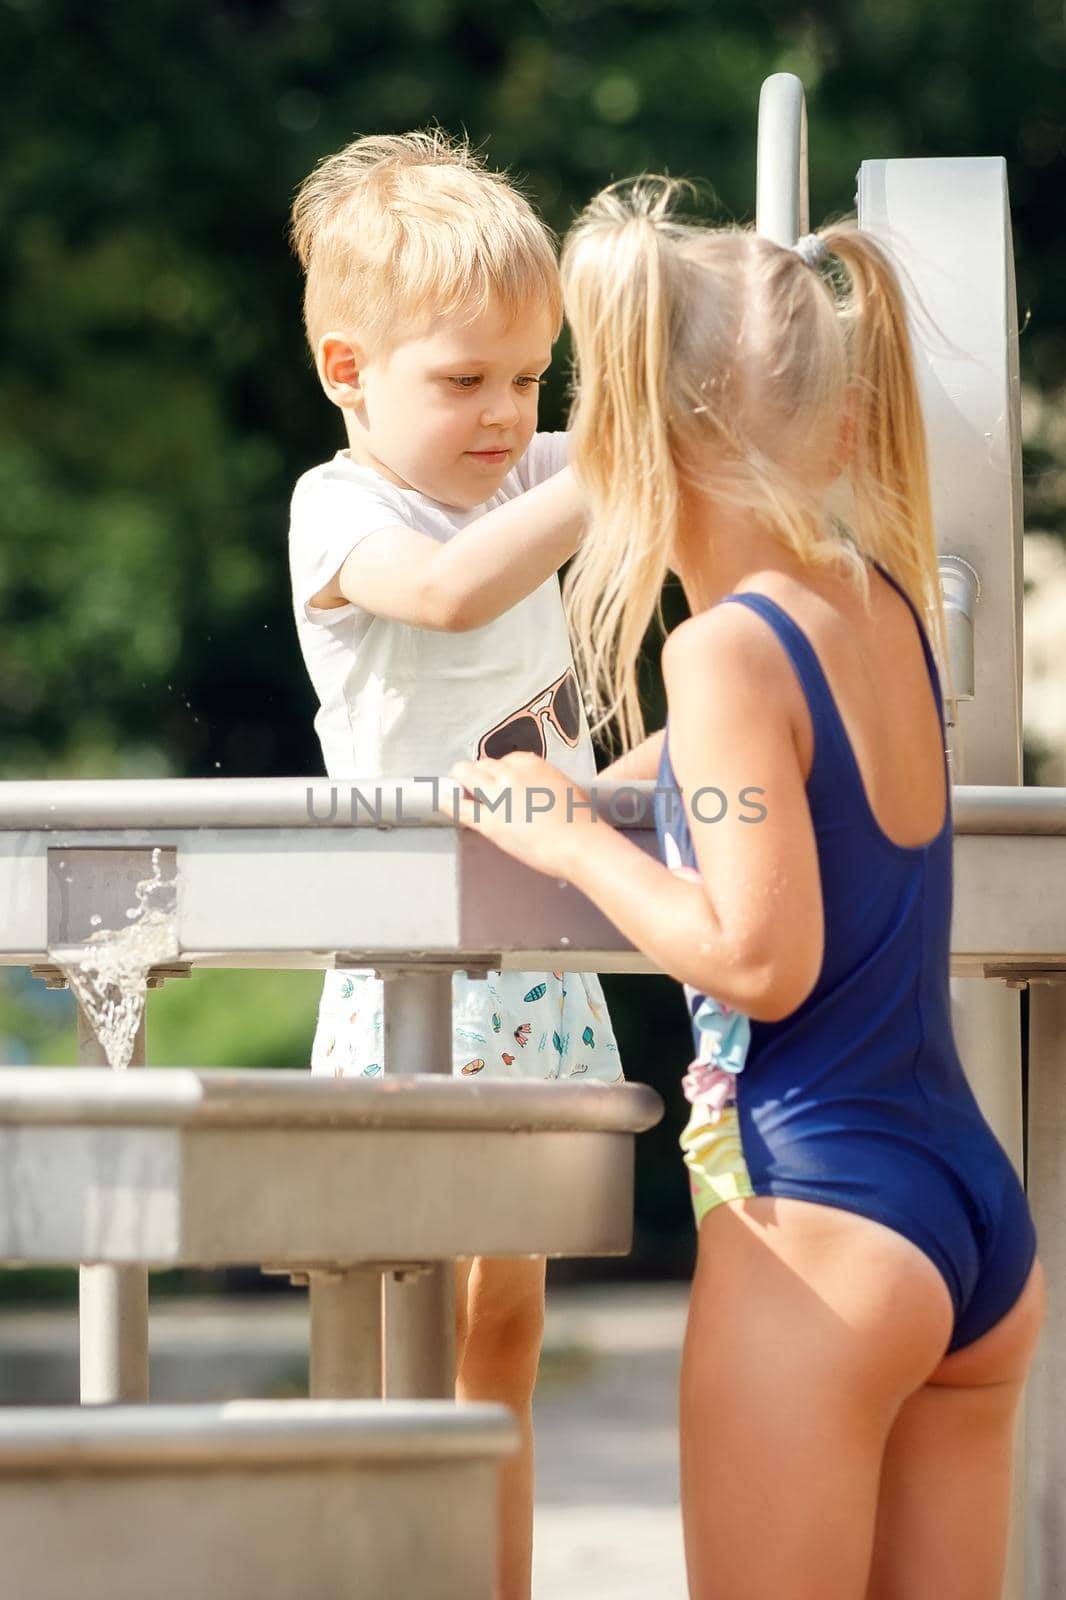 A happy boy and a cute girl in a blue bathing suit play with a water tap in a city park. Vertical by Lincikas